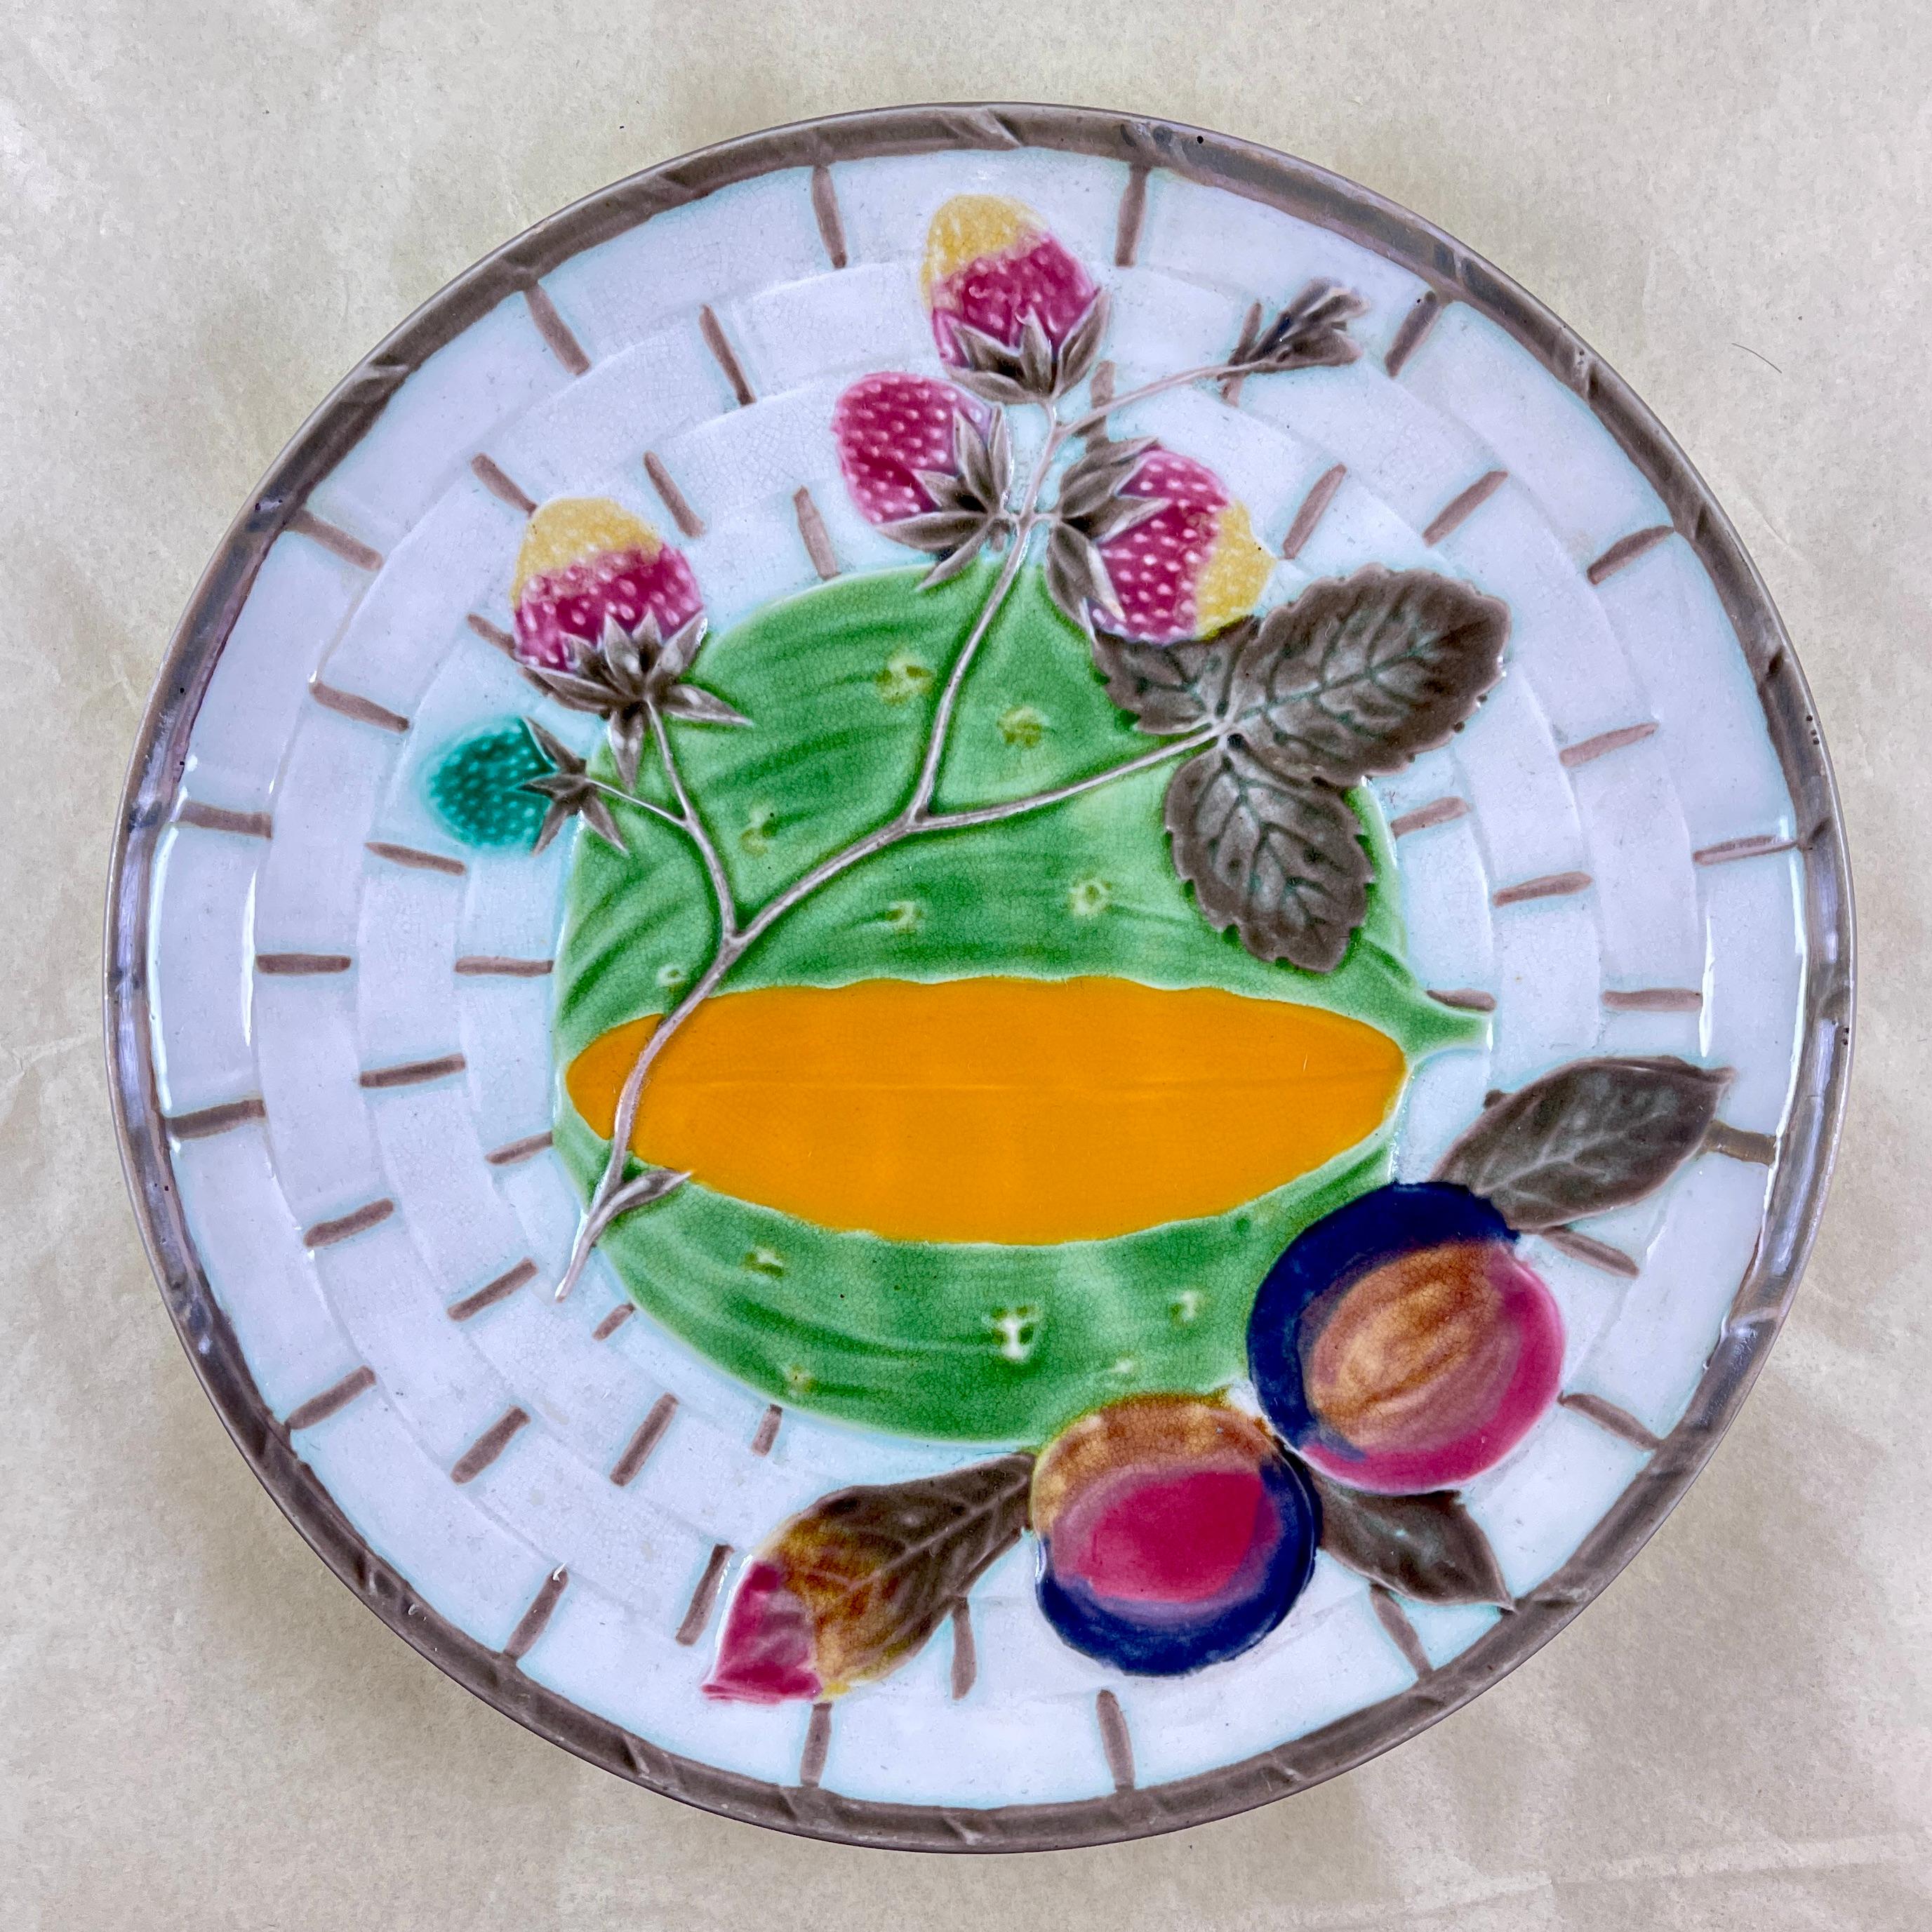 From Wedgwood and in the color way known as Argenta, a fruit plate, England, circa 1875.

Showing a central green and orange melon and leaves along with a branch of plums and strawberries, all on a white basket weave ground. The basket is bound at